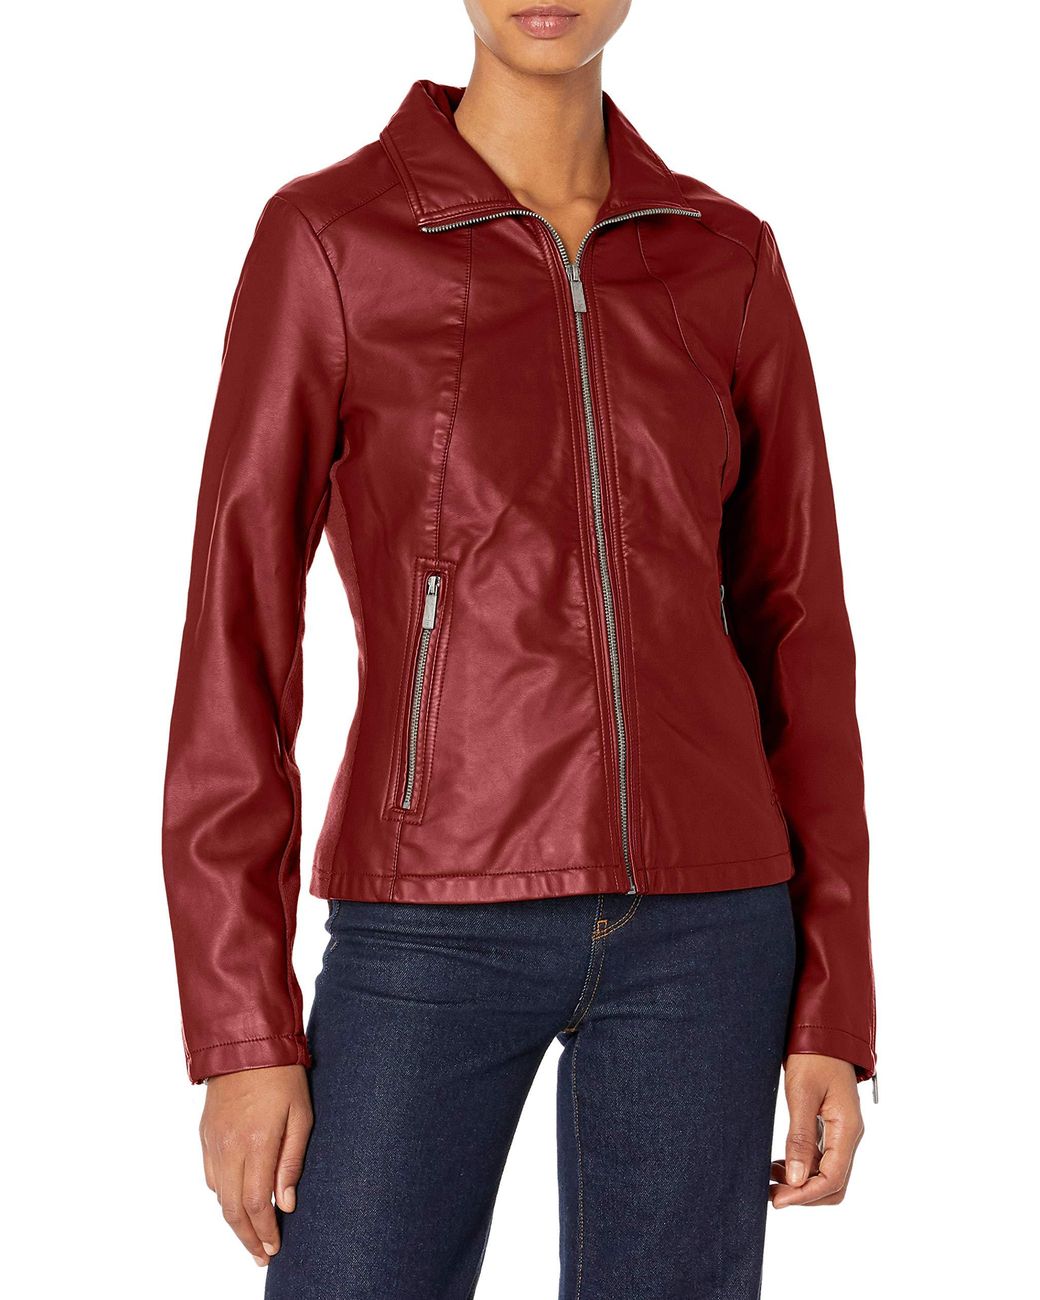 Kenneth Cole Zip Front Faux Leather Jkt in Ruby Red (Red) - Lyst